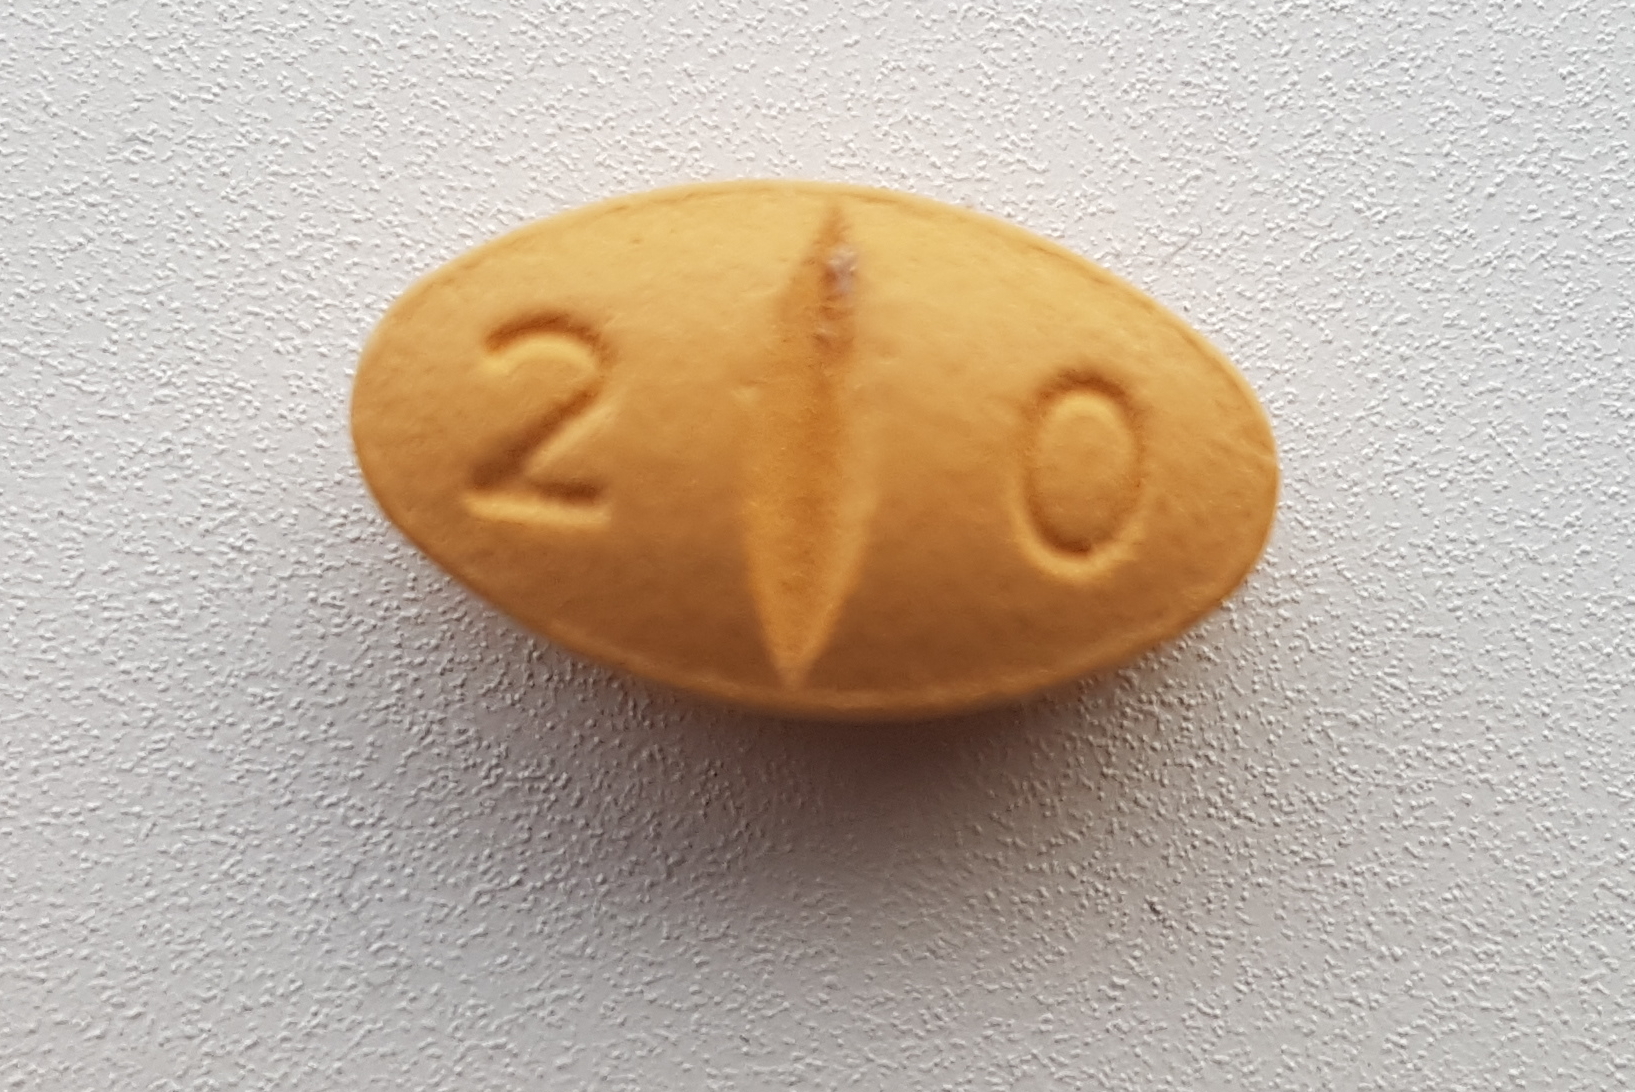 What are the effects of generic Cialis?